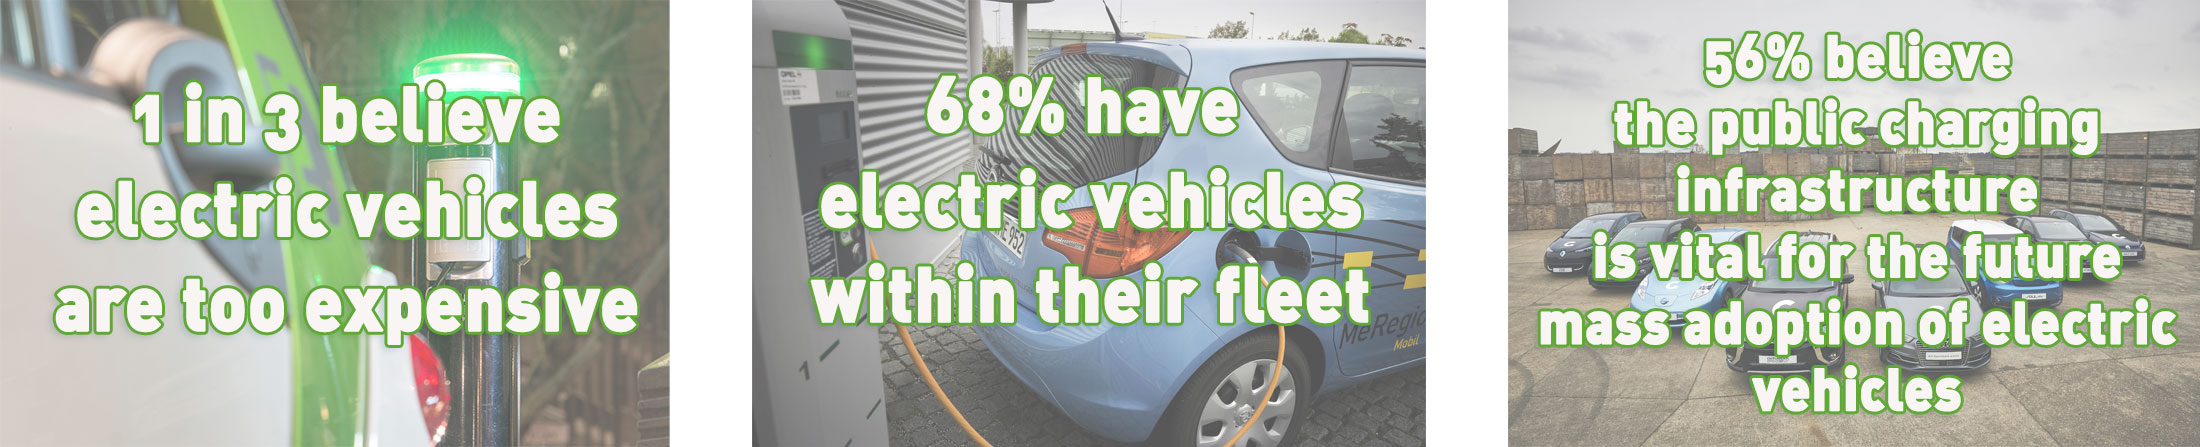 E.ON Electric Vehicle report in partnership with GreenFleet